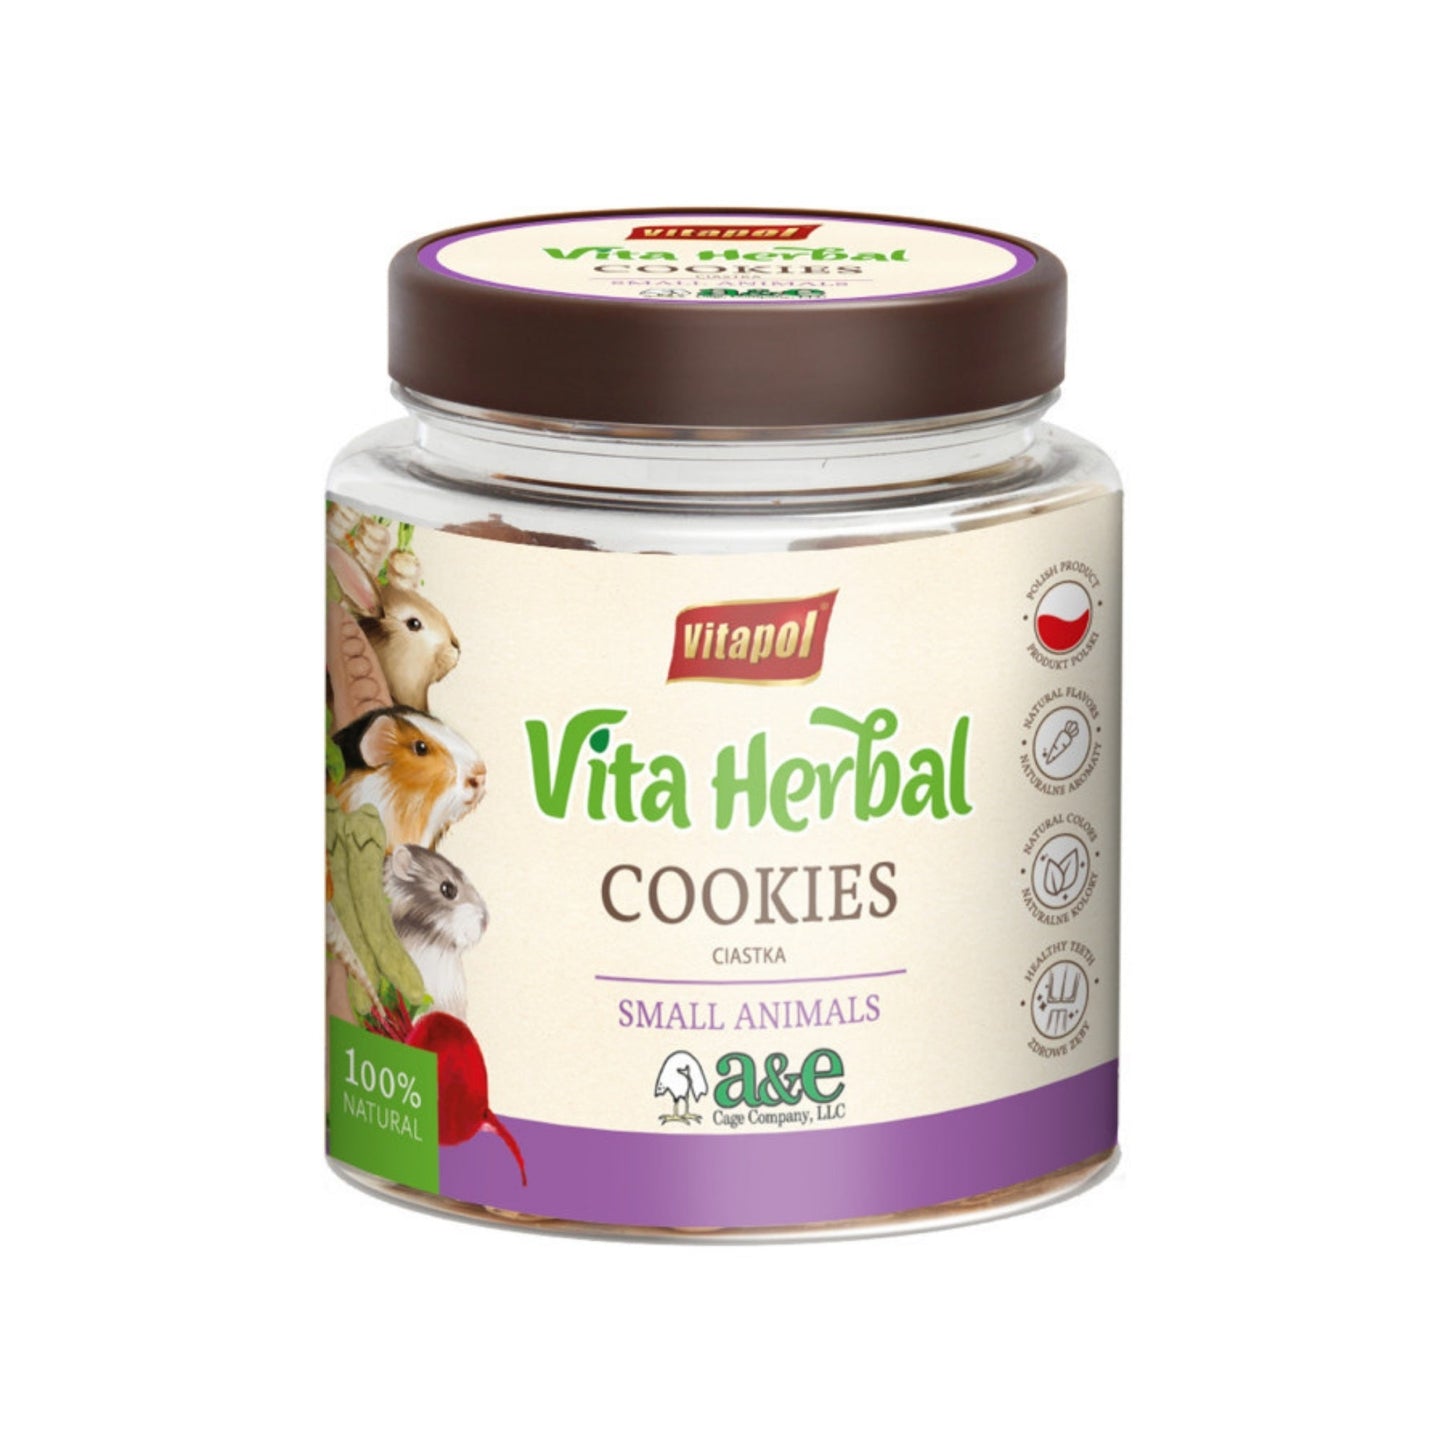 A & E Cages Vitapol Vita Herbal Small Animal Cookies 1ea/240 g